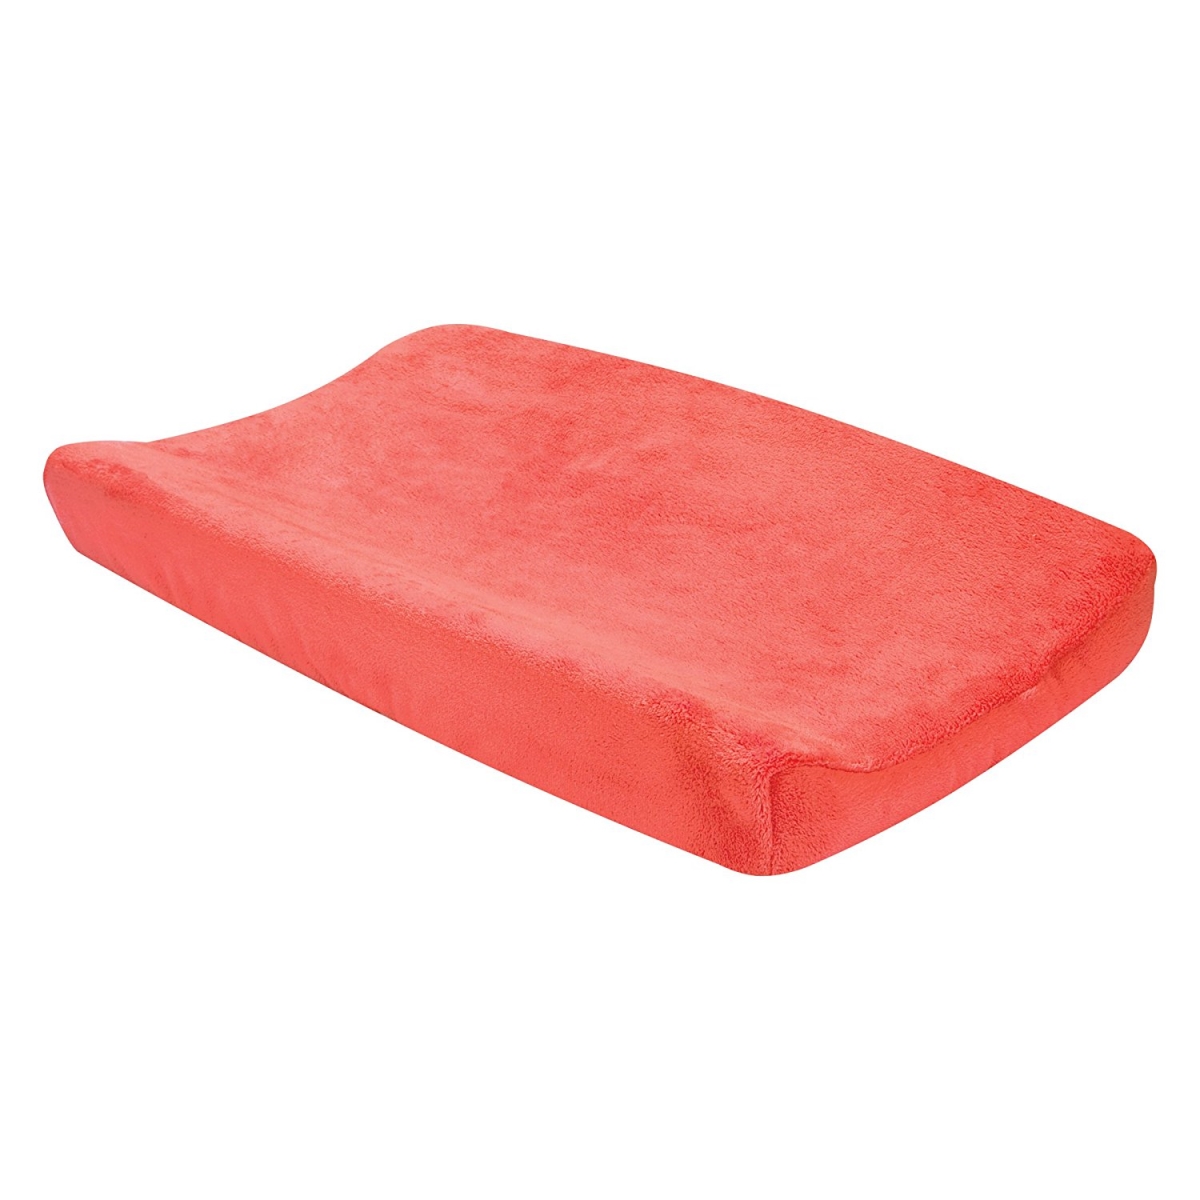 102693 16 X 32 In. Porcelain Plush Changing Pad Cover, Rose Coral